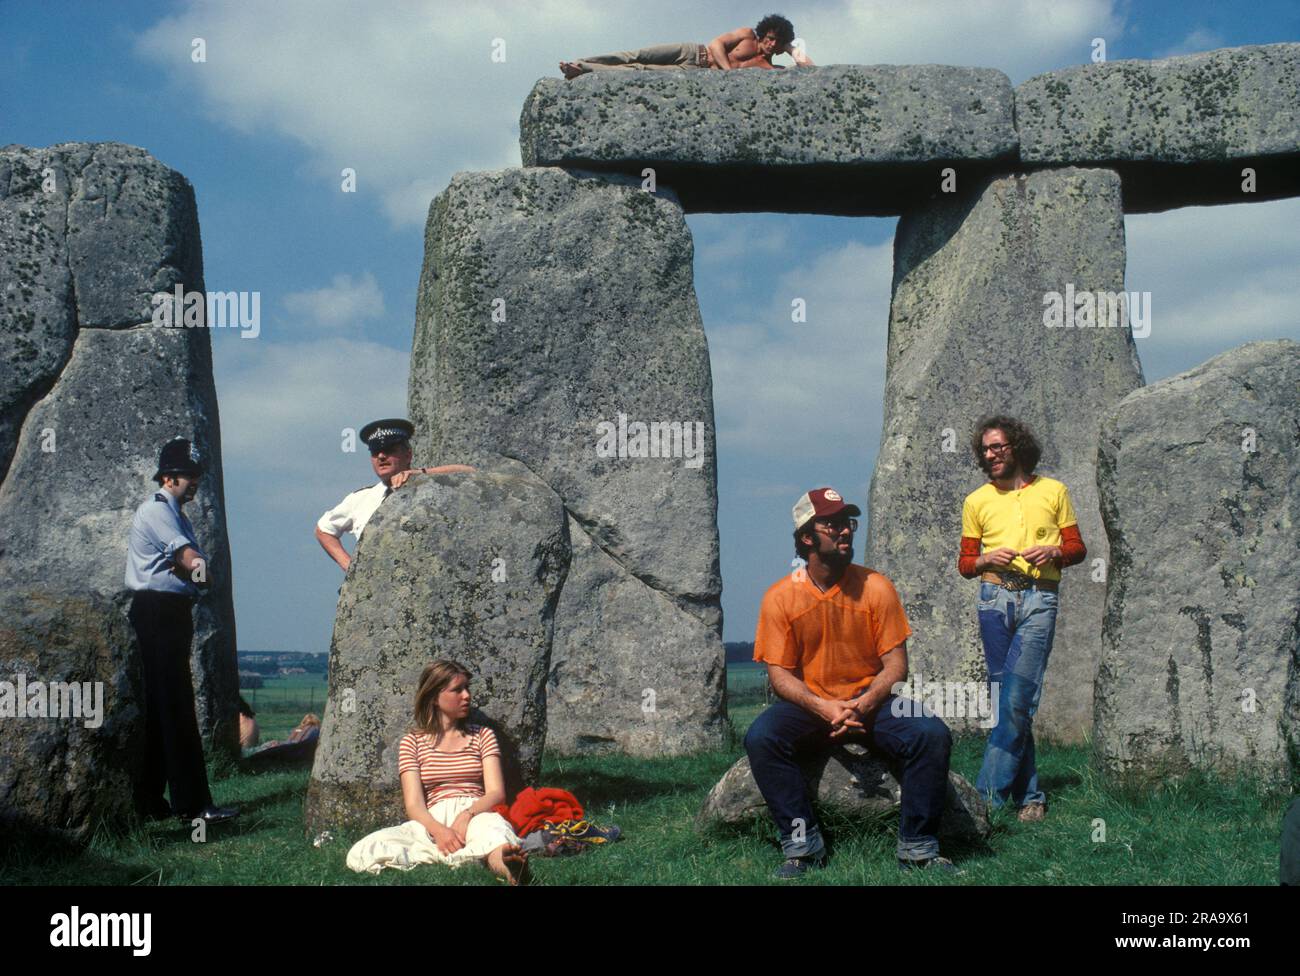 Stonehenge Free Festival at the summer solstice, 1970s style hippies attend the free festival at Stonehenge to celebrate the summer solstice. Besides the hippies a small group of tourists came to watch the celebrations over the three day event. Wiltshire, England June 21st 1979 70s UK HOMER SYKES Stock Photo